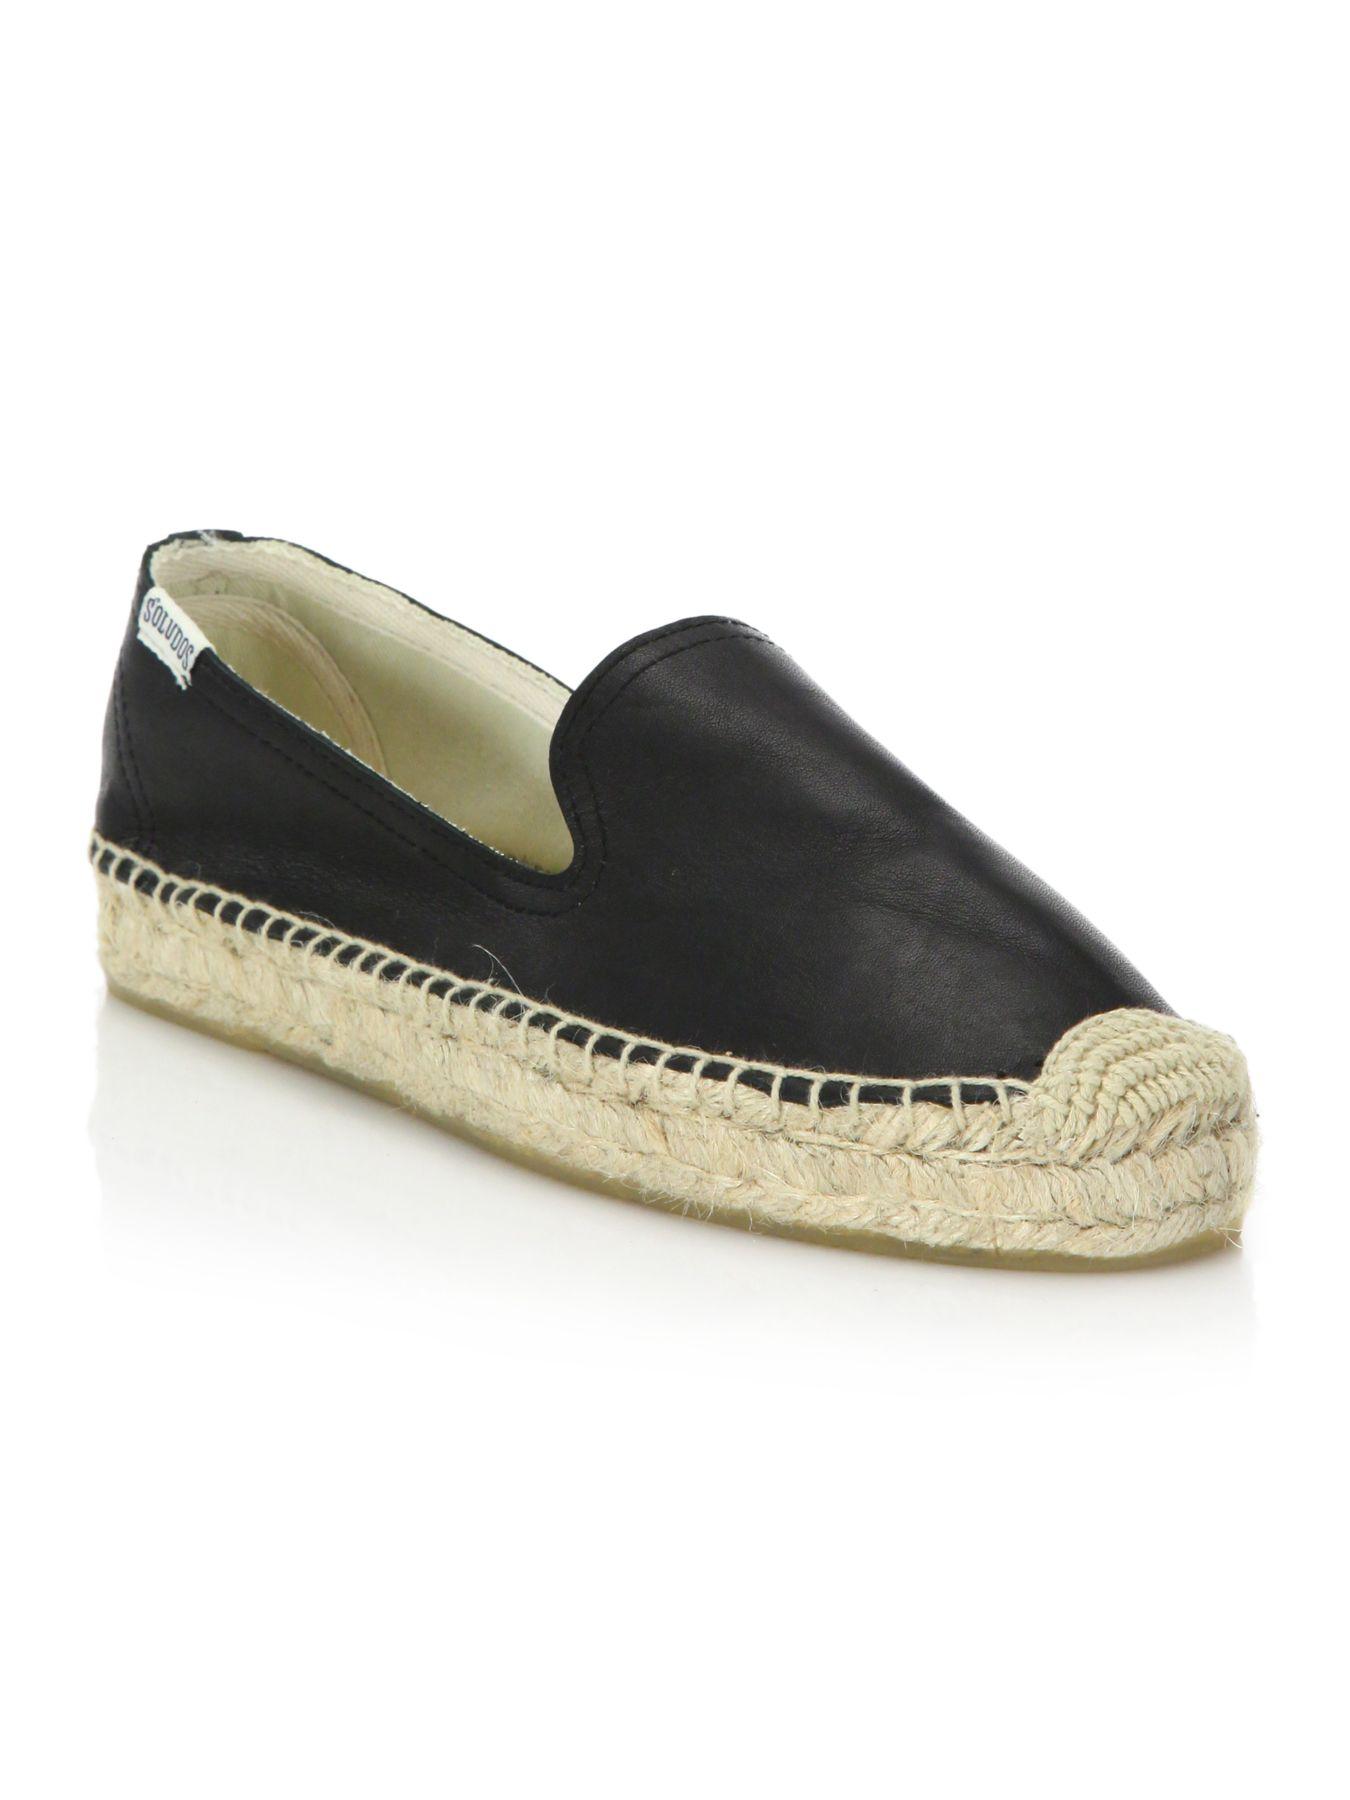 Soludos Leather Espadrilles in Black - Lyst